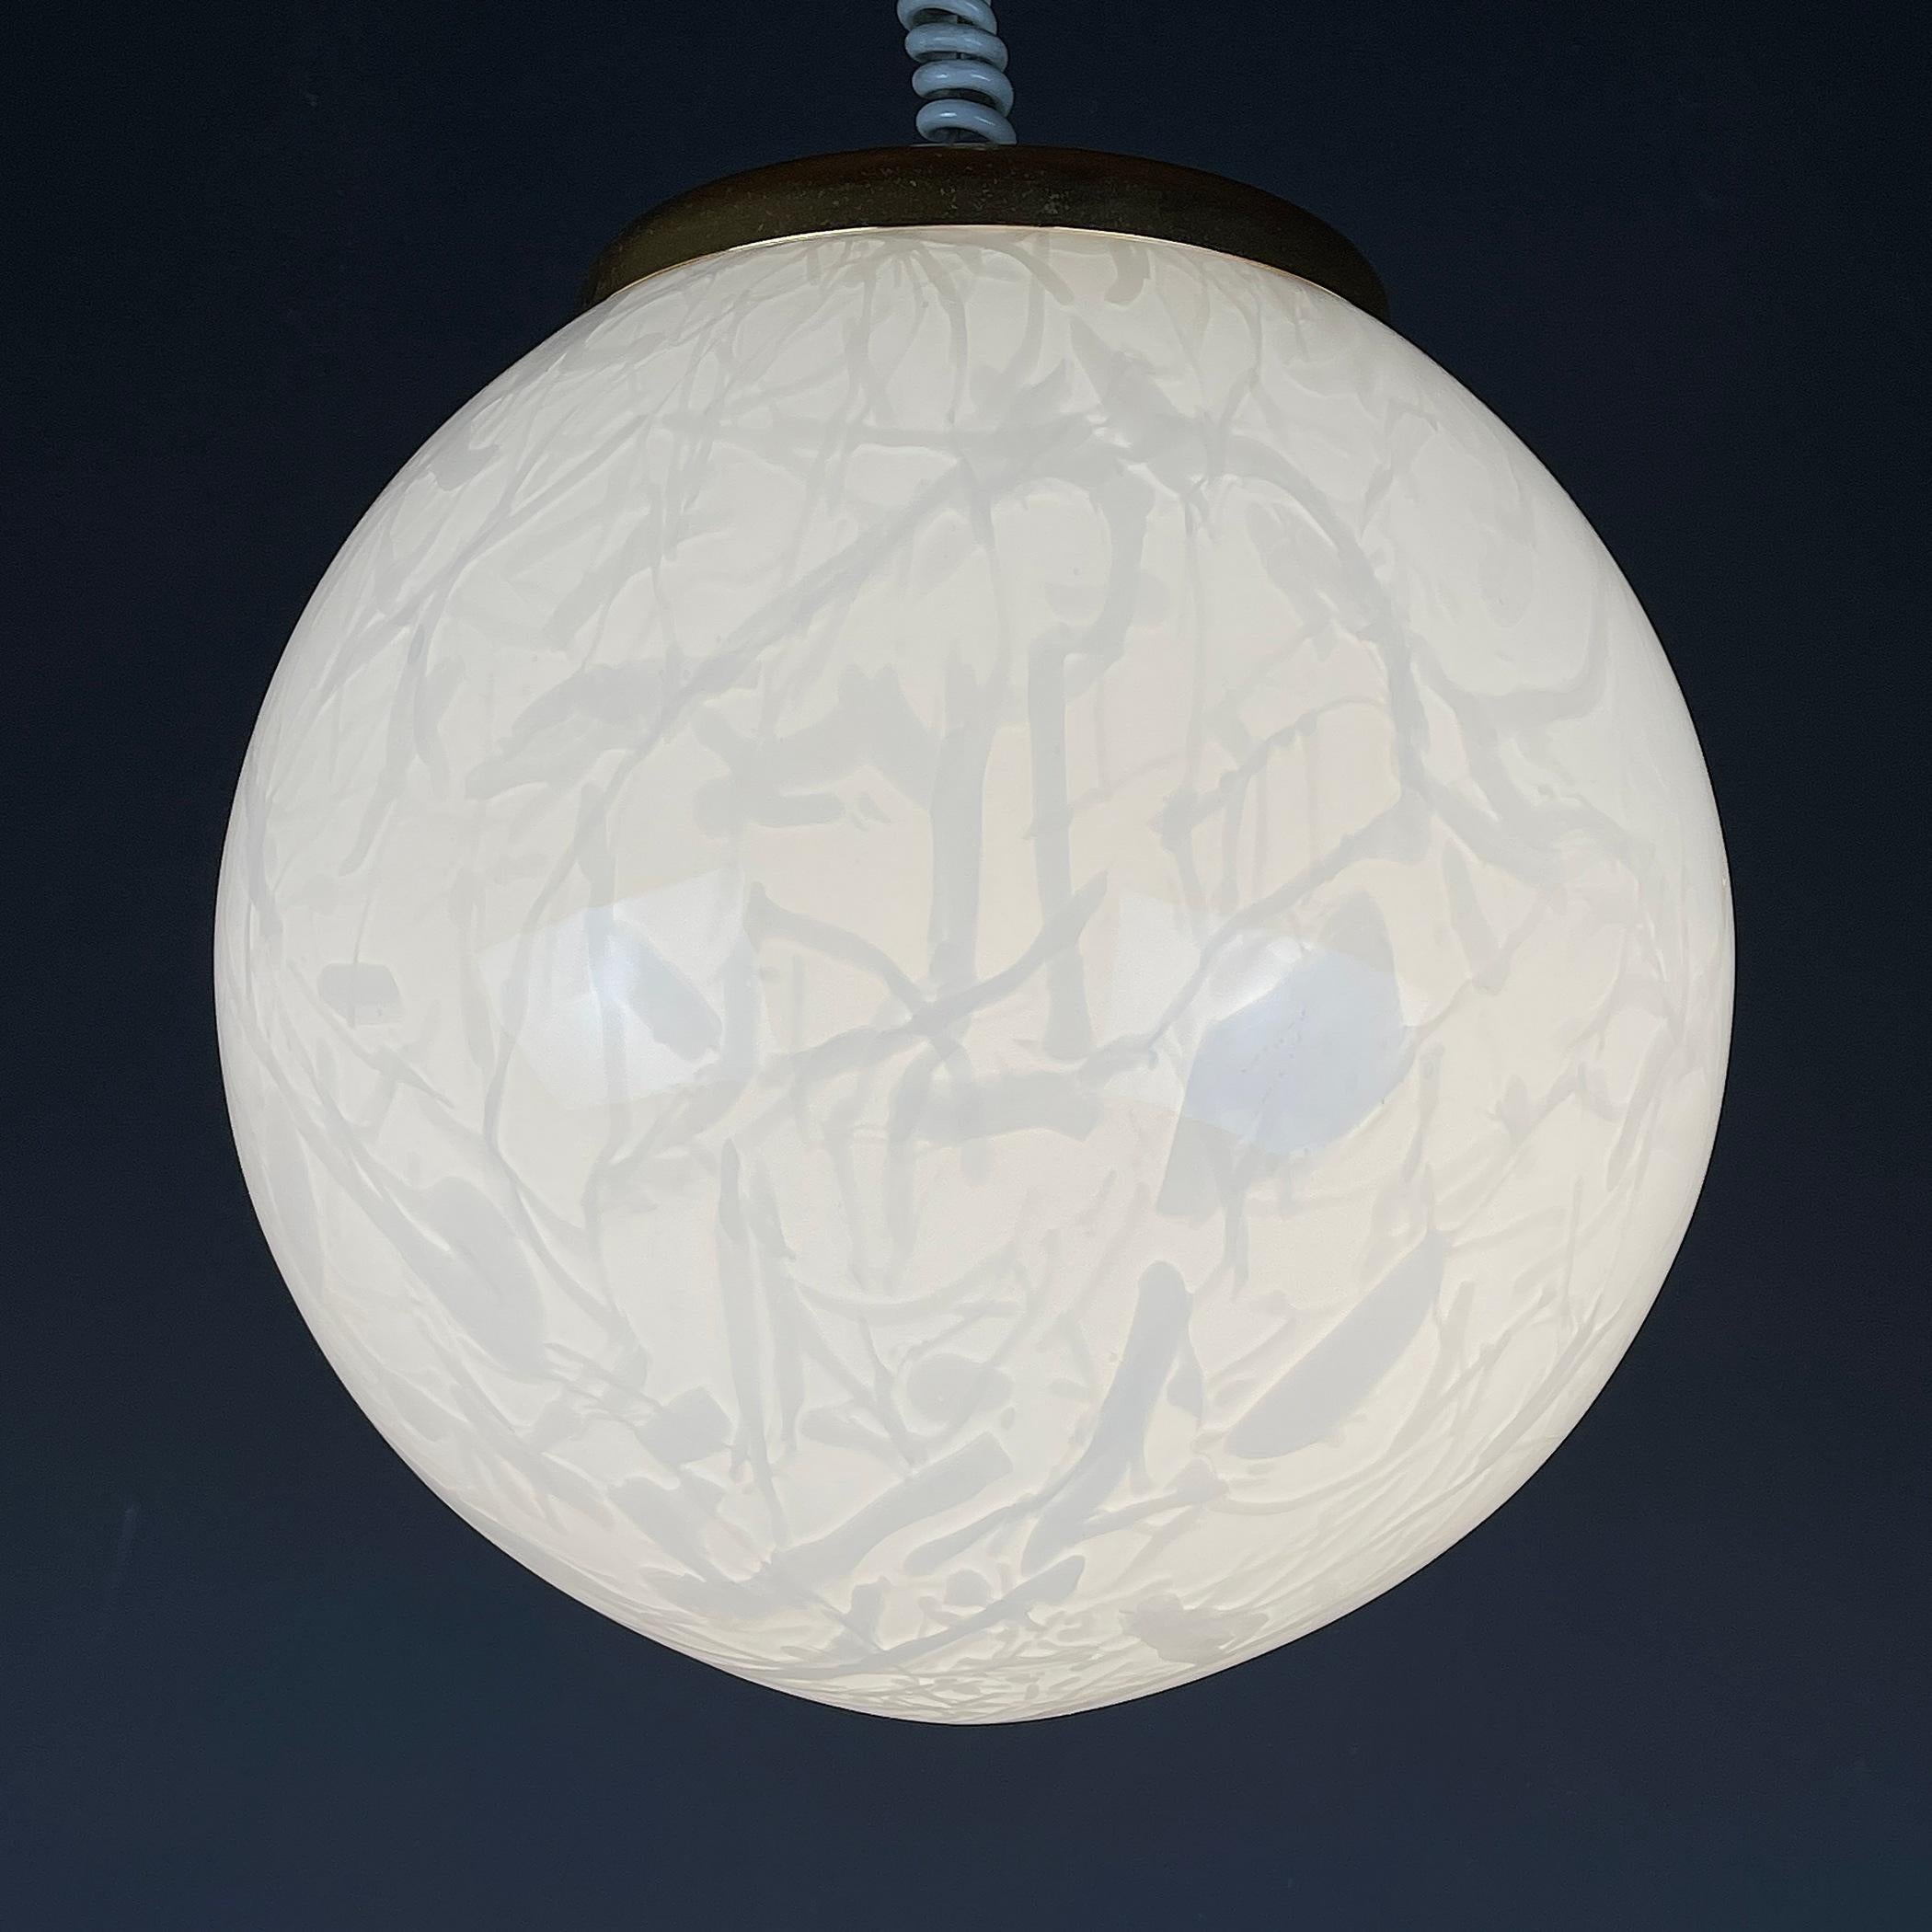 Elevate your space with timeless elegance through this stunning white Murano pendant lamp, handcrafted in the 1970s Italy. Its flawless condition exudes sophistication, showcasing the exquisite beauty of Murano glass.

Impeccable and fully